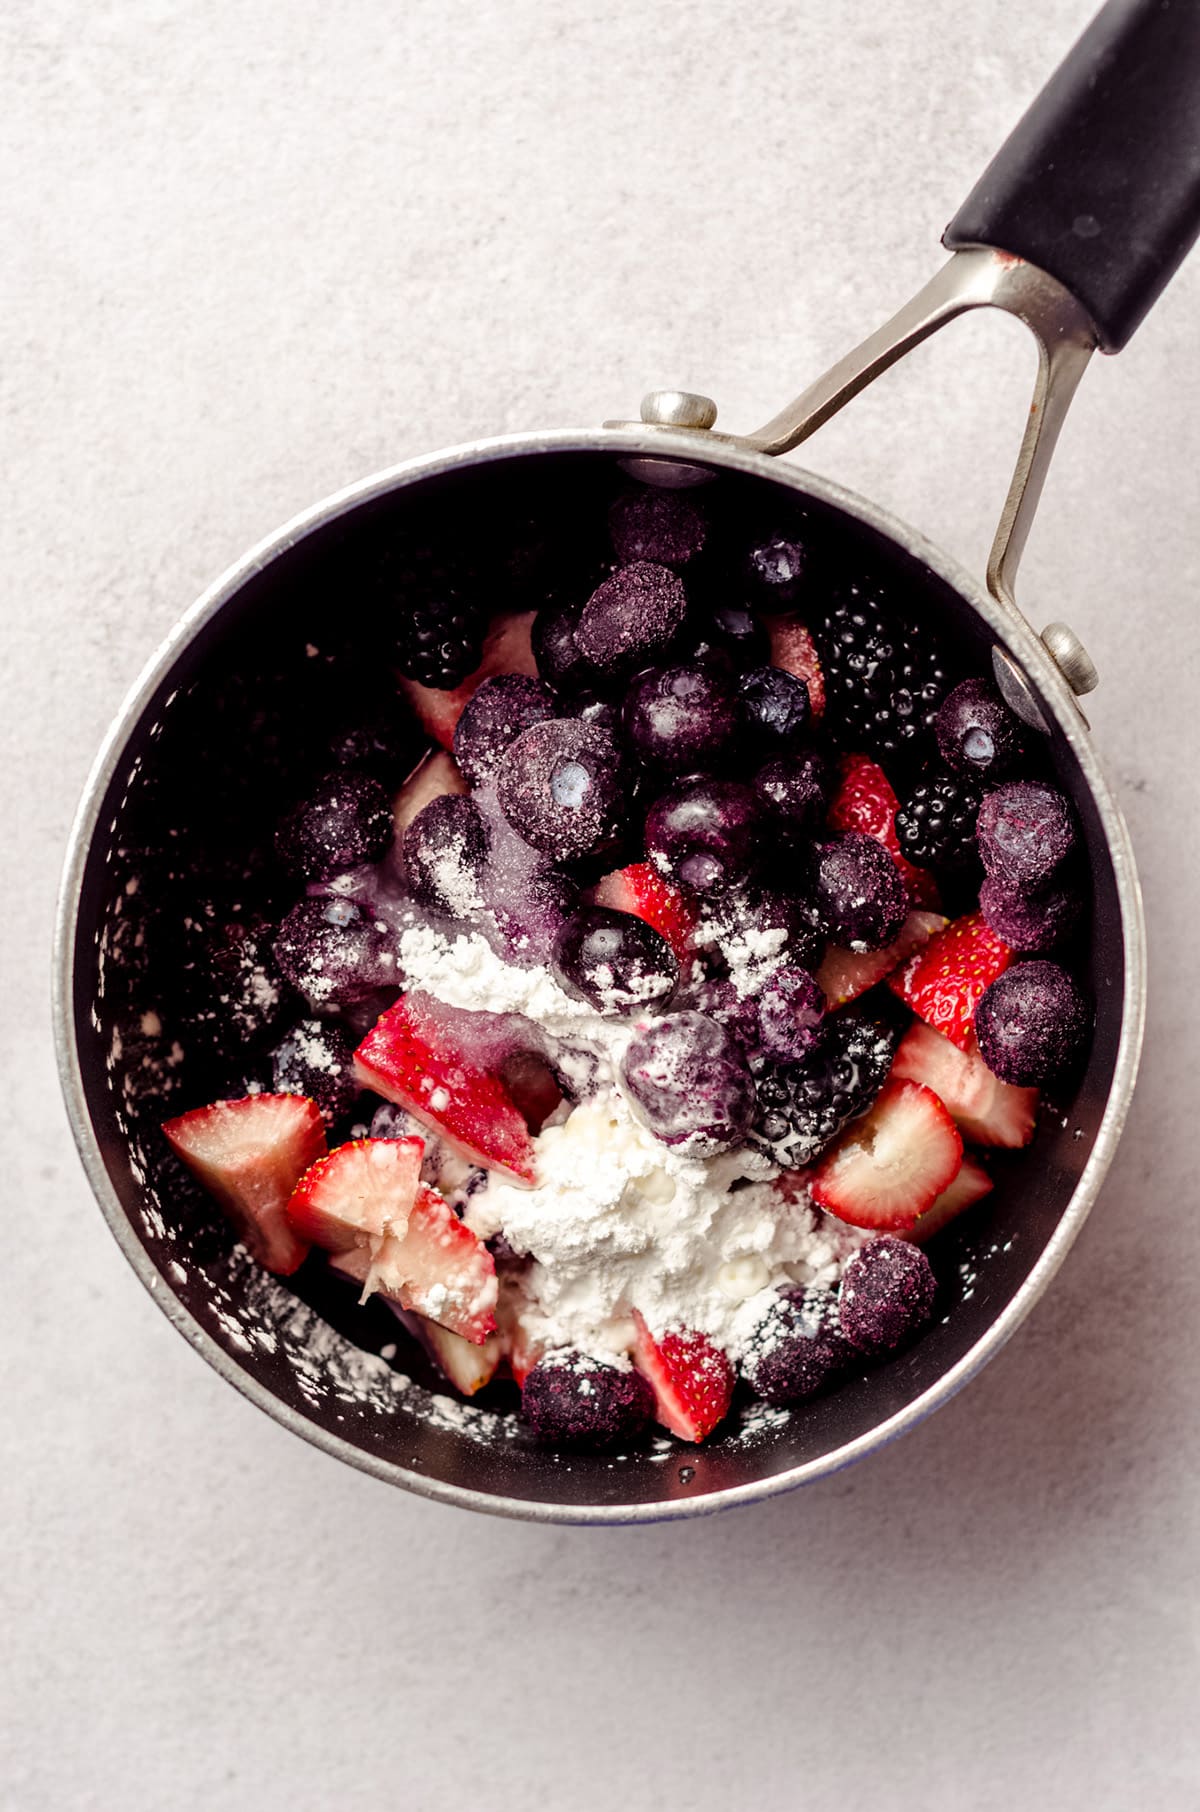 Adding lemon juice, sugar, and cornstarch added to a small saucepan along with berries.